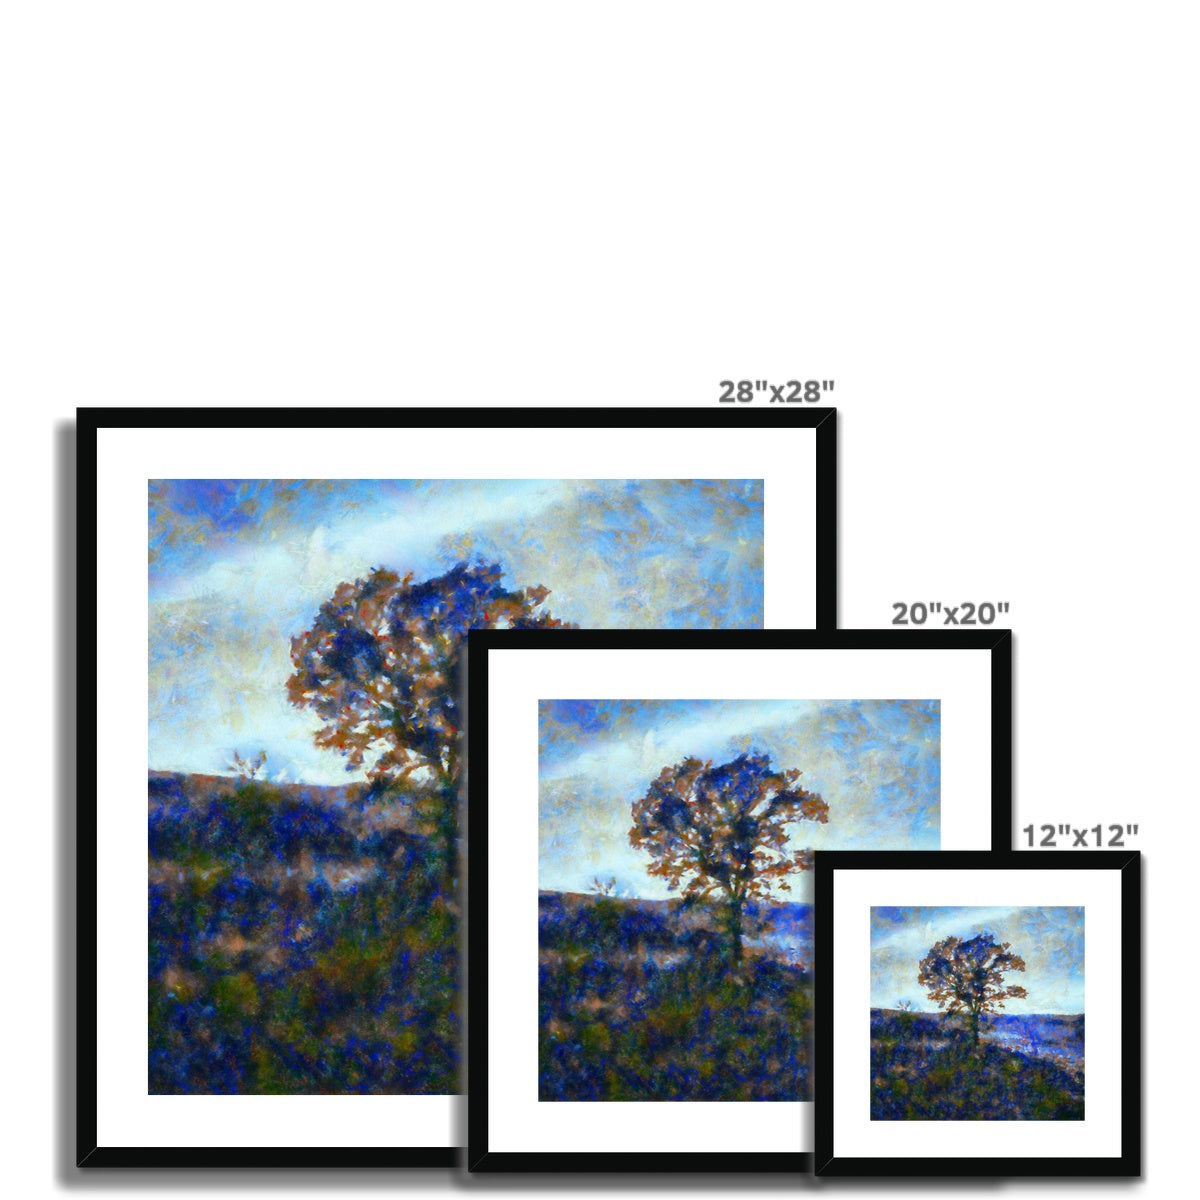 A Winter Highland Tree Painting | Framed & Mounted Prints From Scotland-Framed & Mounted Prints-Scottish Highlands & Lowlands Art Gallery-Paintings, Prints, Homeware, Art Gifts From Scotland By Scottish Artist Kevin Hunter